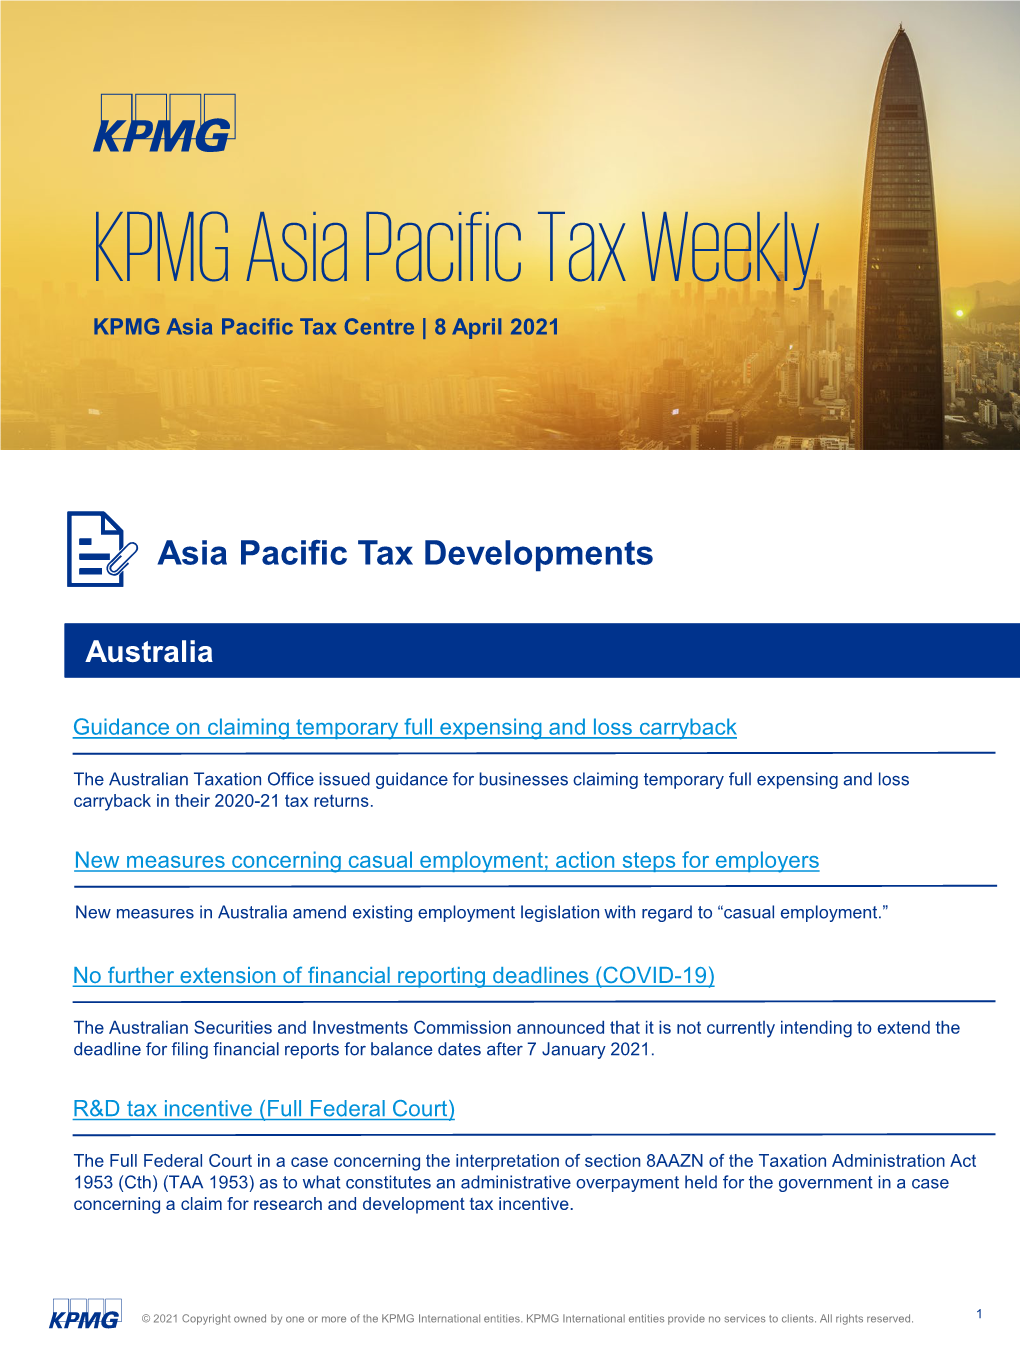 Asia Pacific Tax Weekly Newsletter